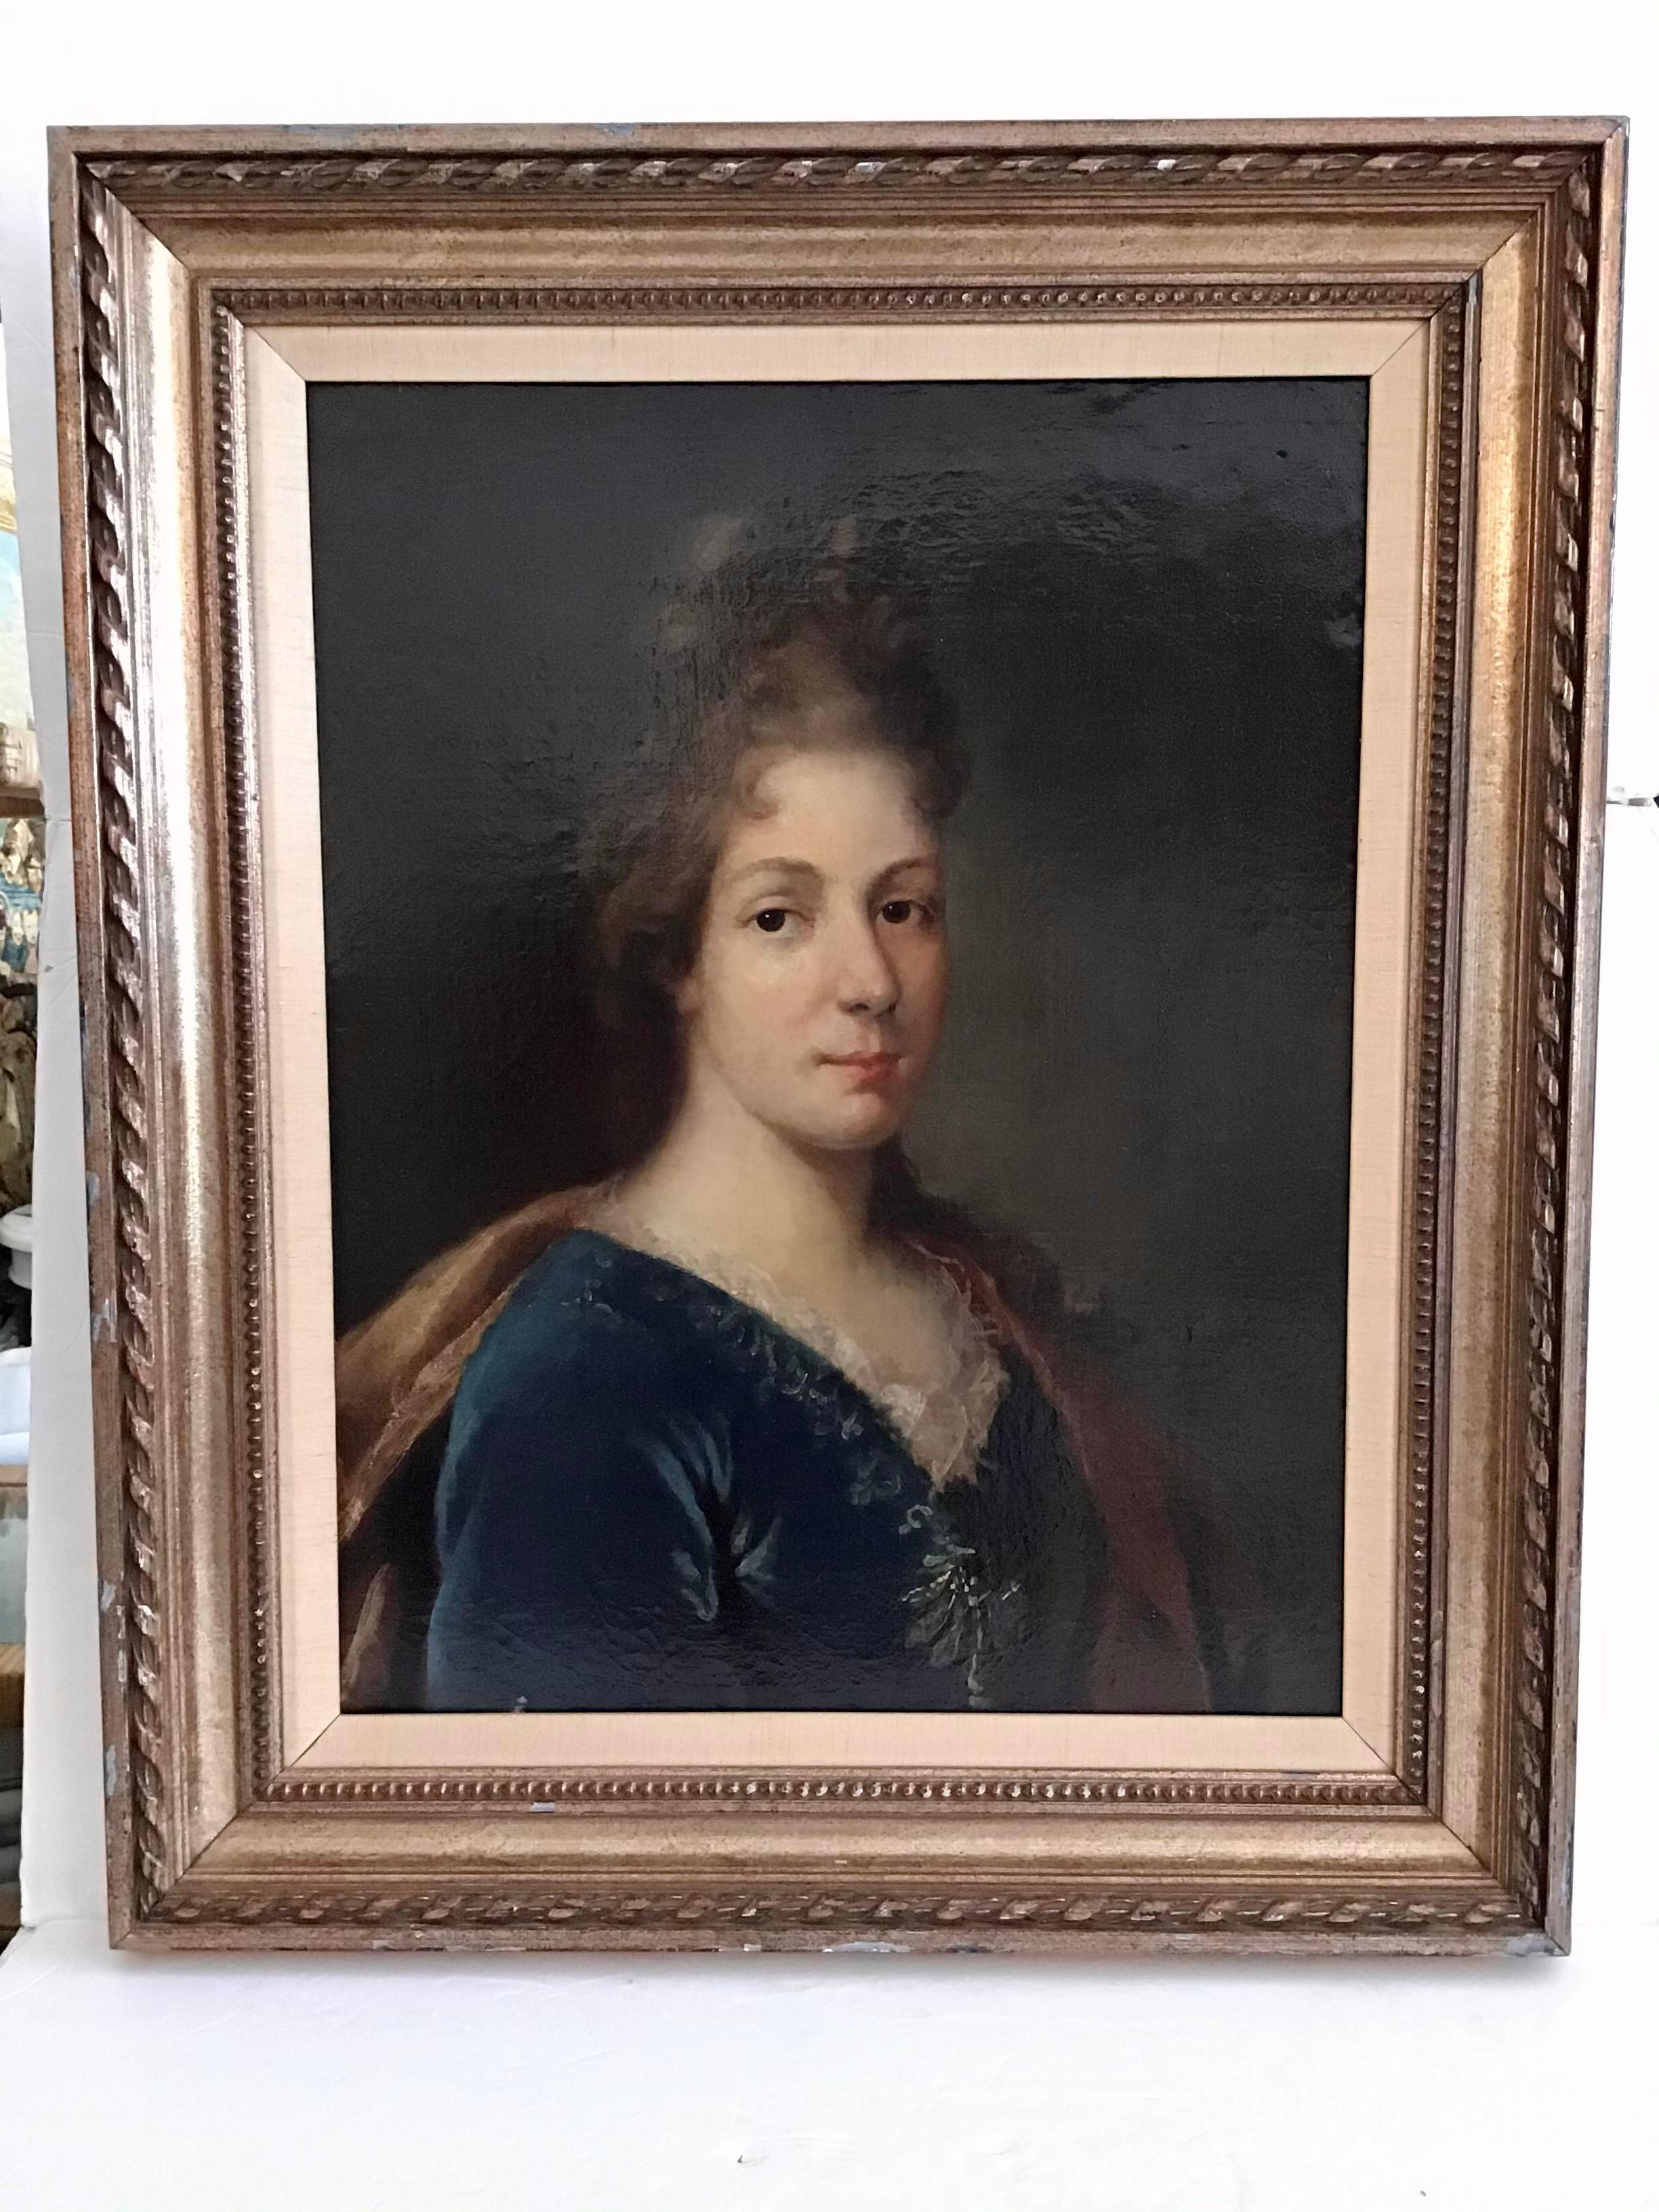 Wonderful 18th century painted portrait of a French noblewoman. The frame is nicely carved and the canvas is in great condition. Classic French style.